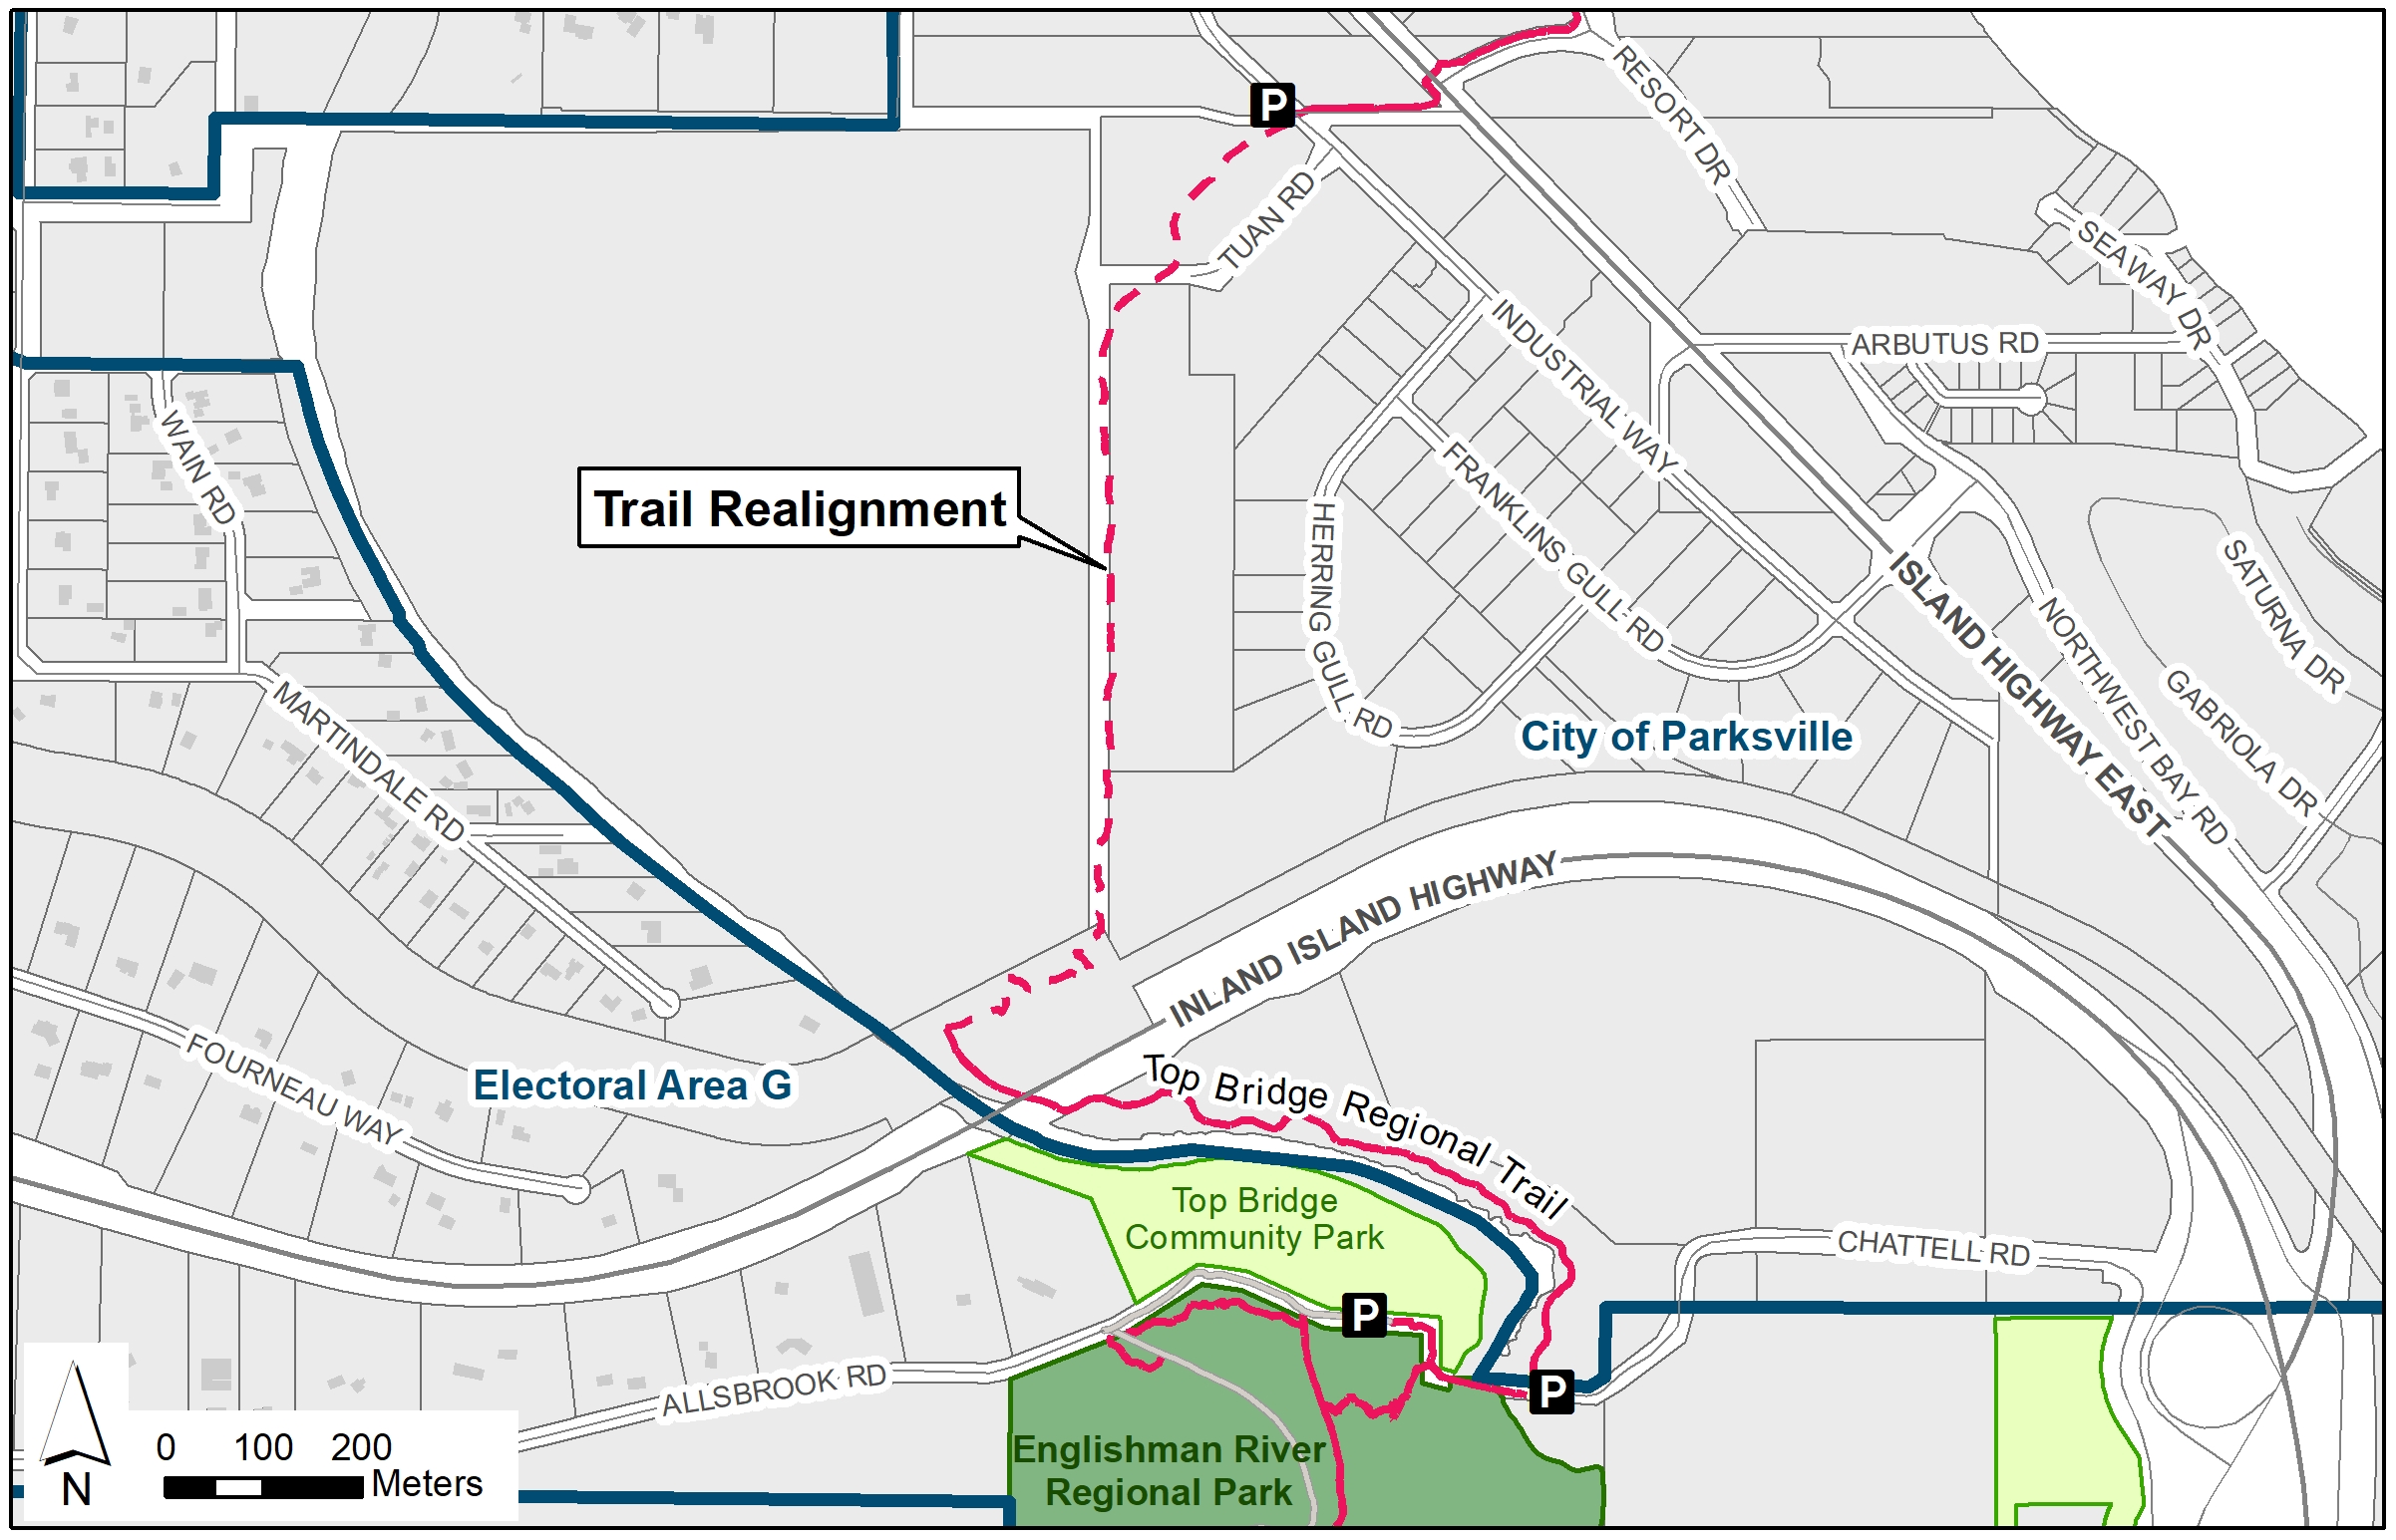 Trail Realignment Map